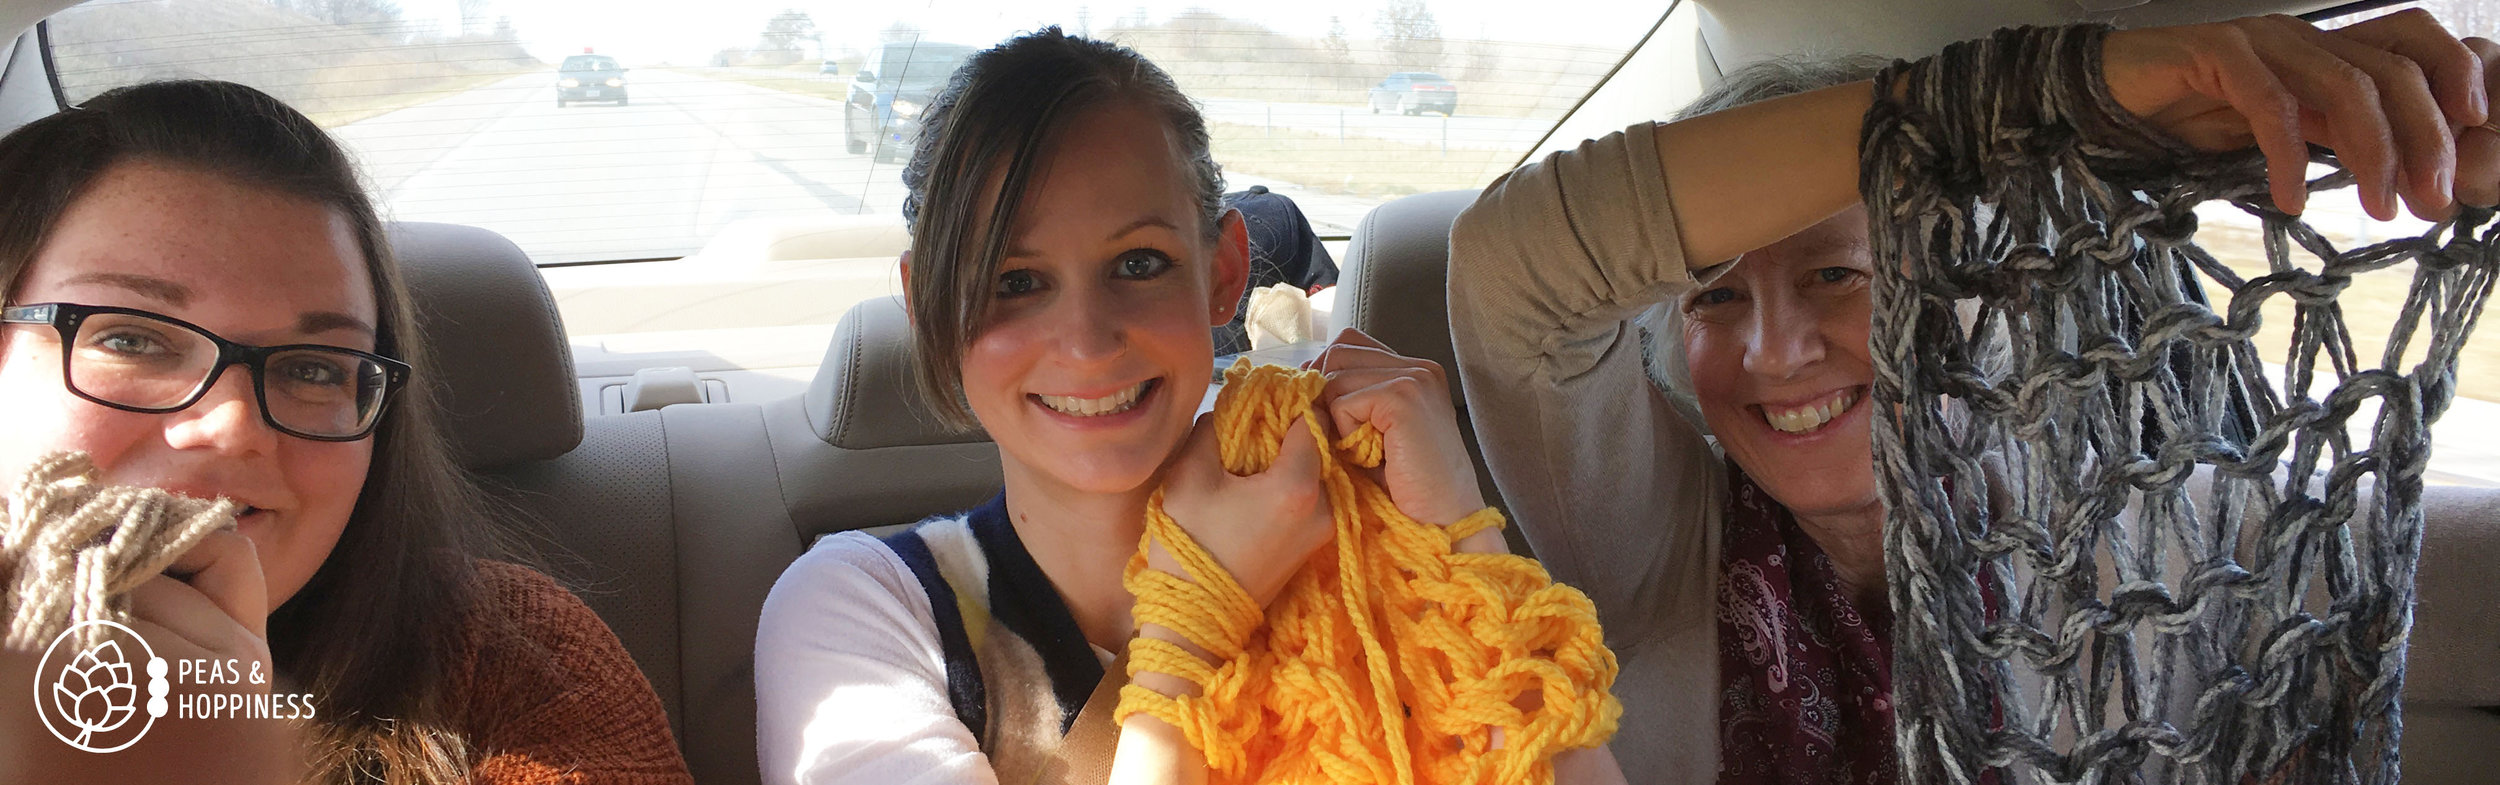 This year I learned to arm knit in the back of a car, taught my brother's amazing girlfriend.